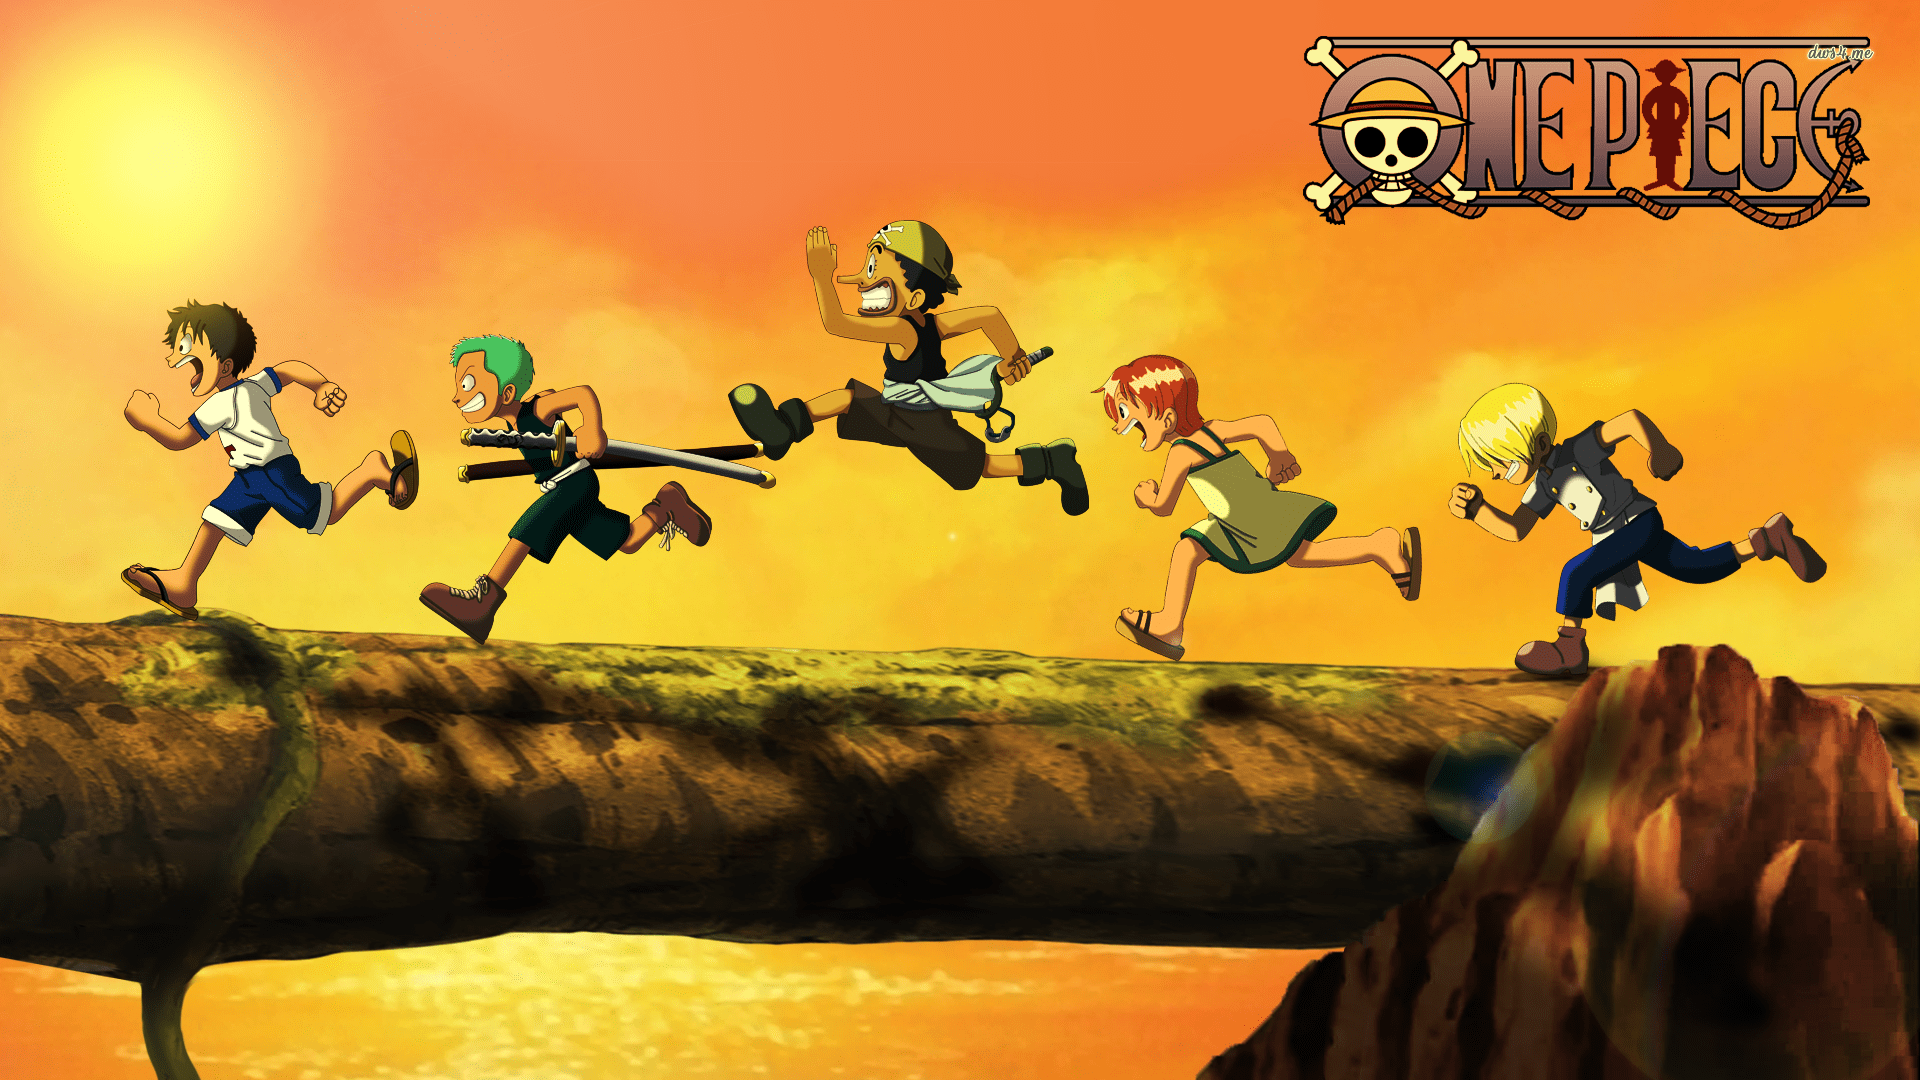 Free download 100 640x1136 for your Desktop Mobile  Tablet  Explore  50 One Piece Live Wallpaper  One Piece Wallpapers One Piece Zoro  Wallpaper One Piece Wallpaper